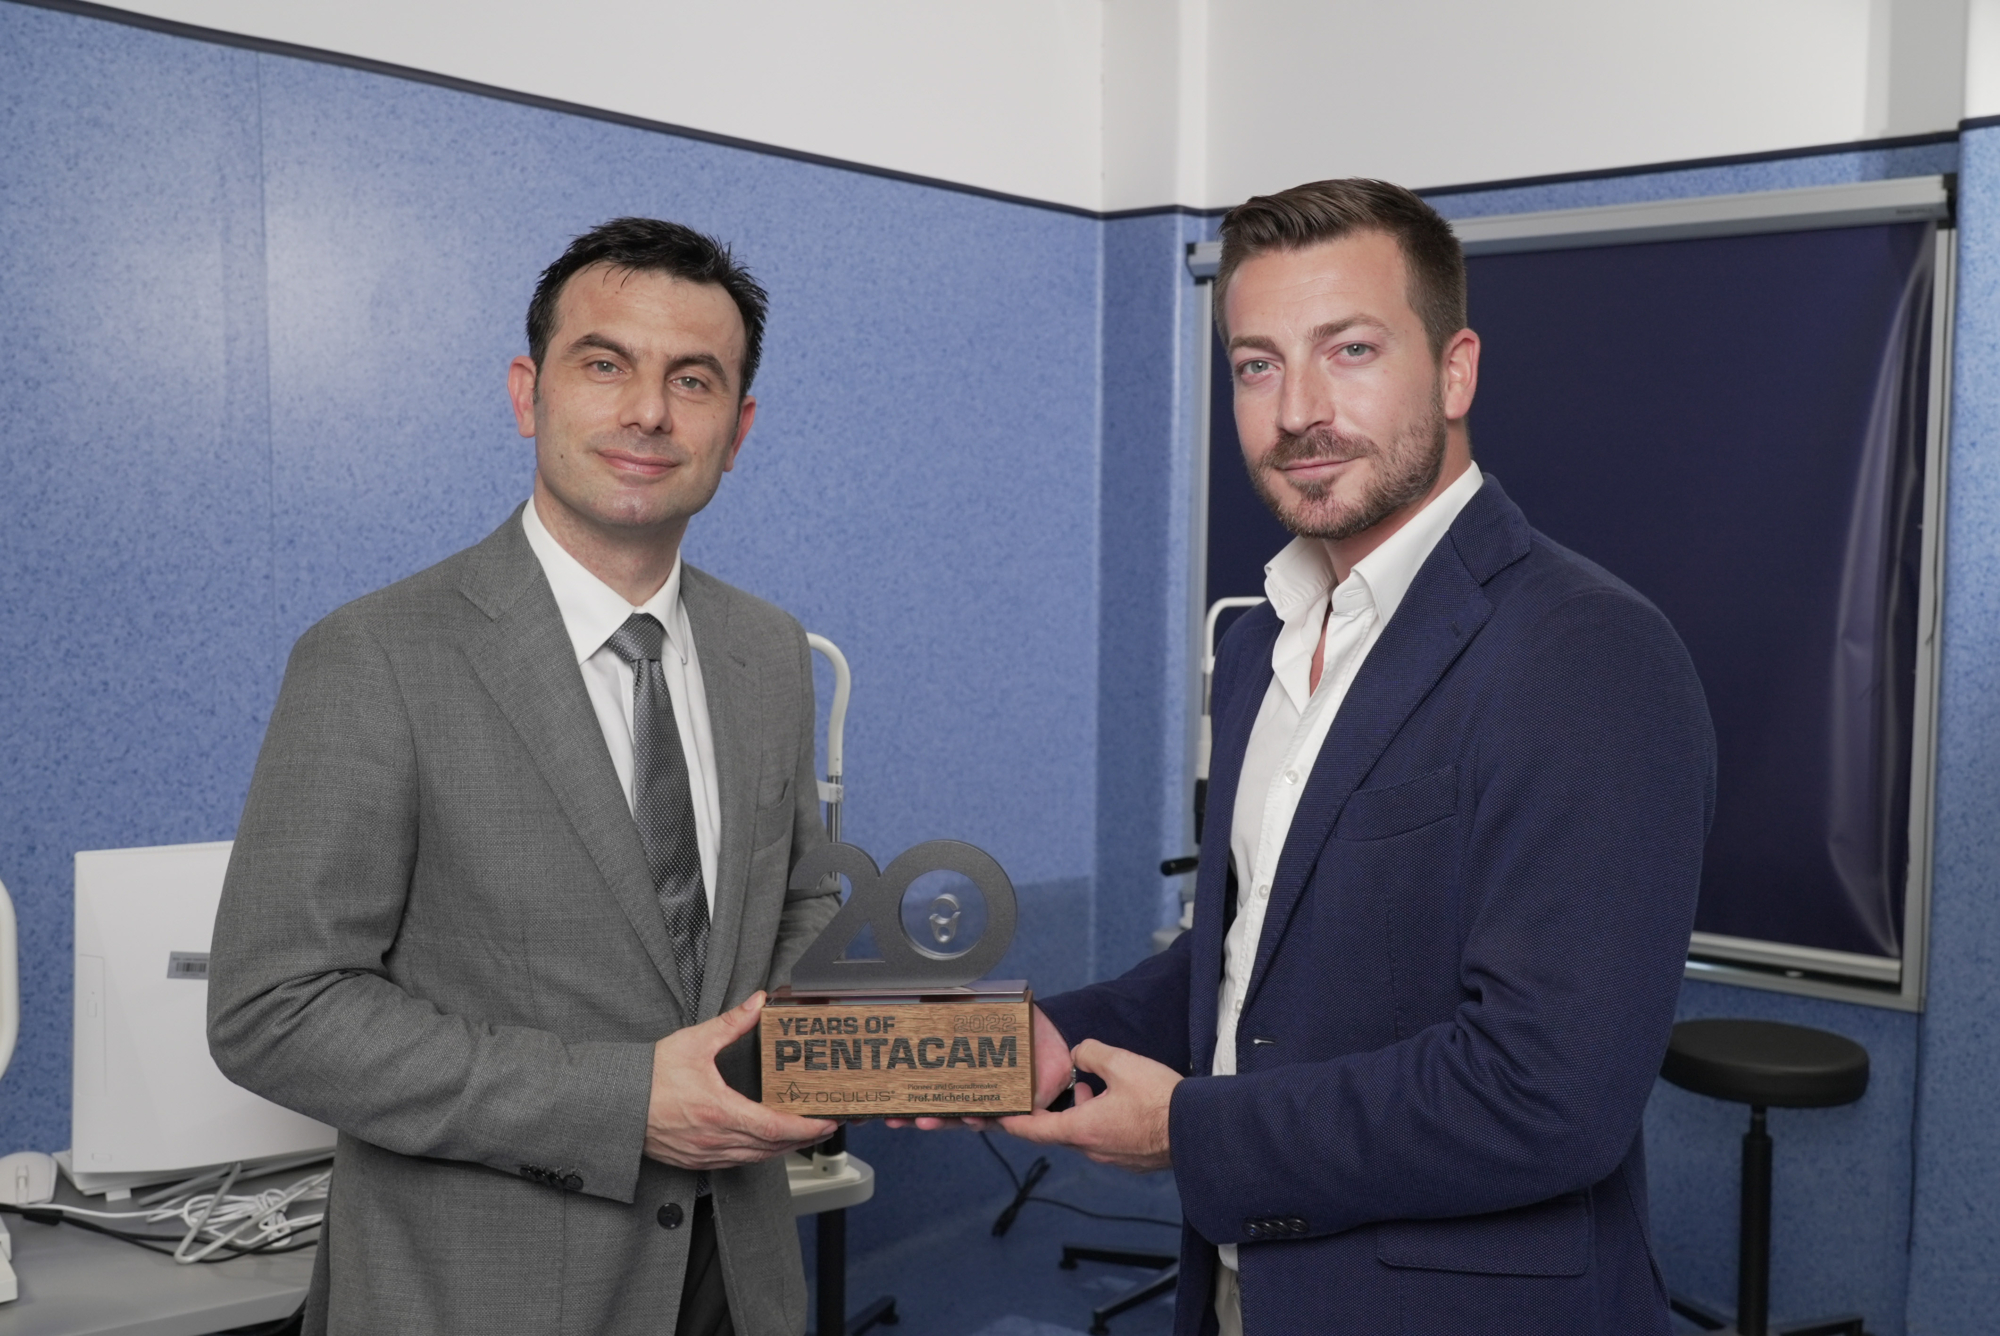 Prof Michele Lanza and Pierpaolo Gabrielli, Chief Operating Officer, holding the 20th Anniversary Pentacam® Trophy